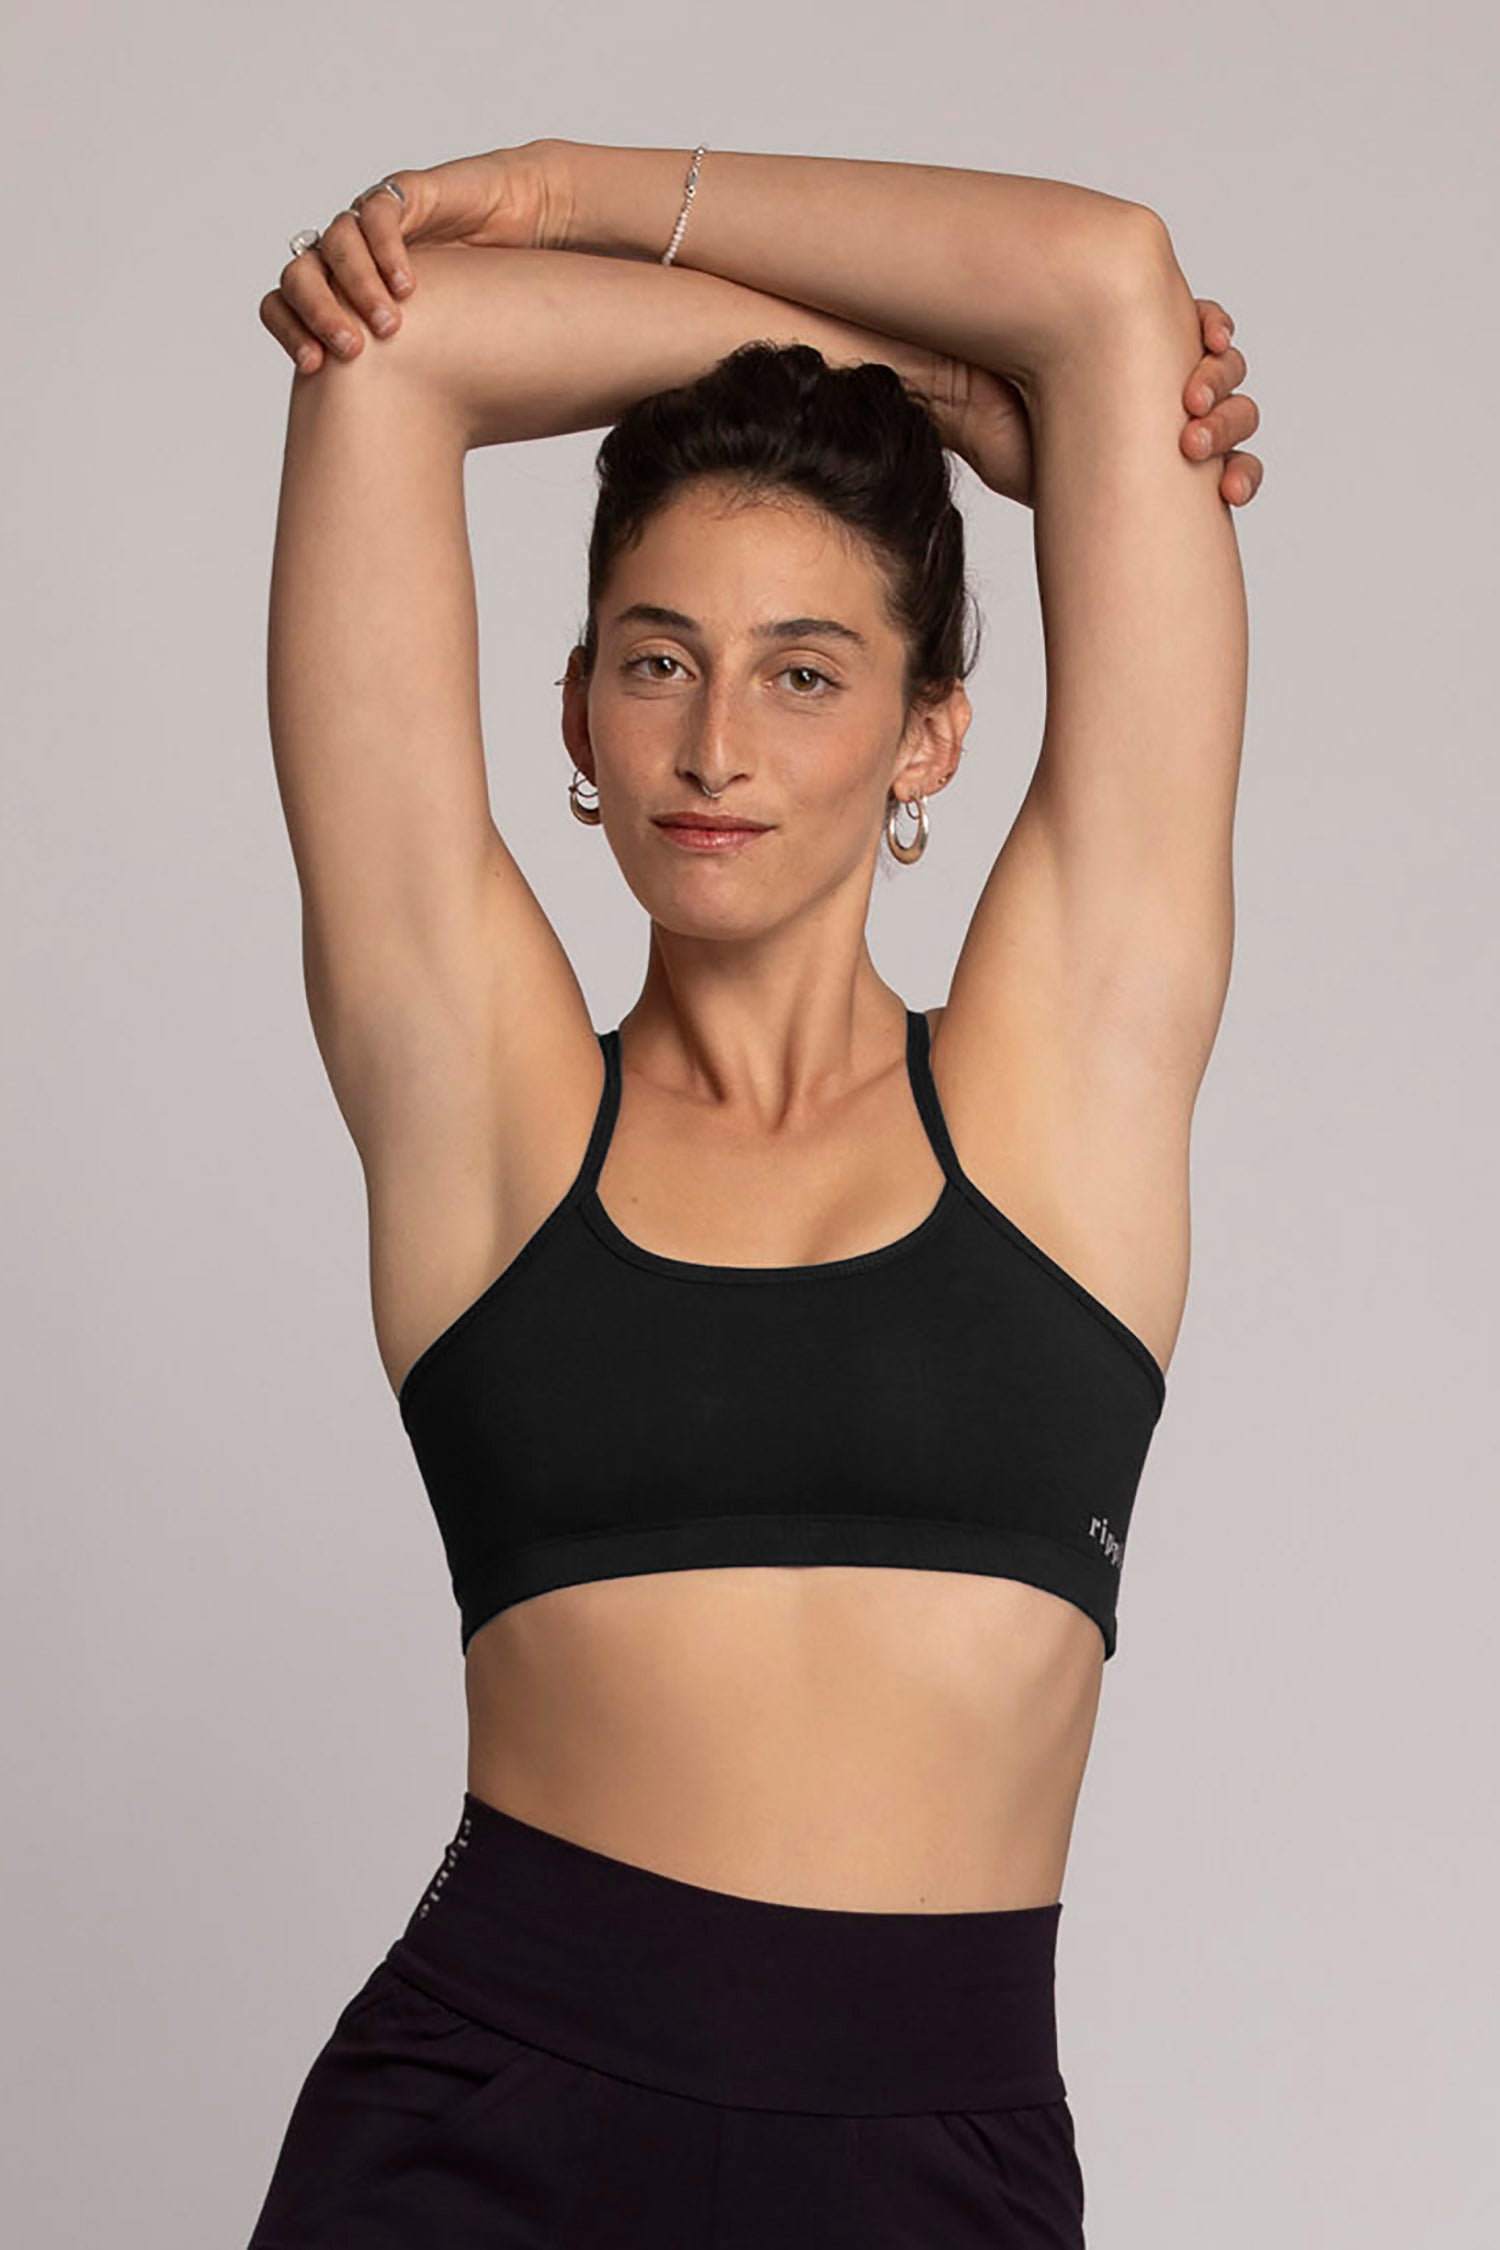 Criss-Cross Sports Bra in color Black by Chandra Yoga & Active Wear